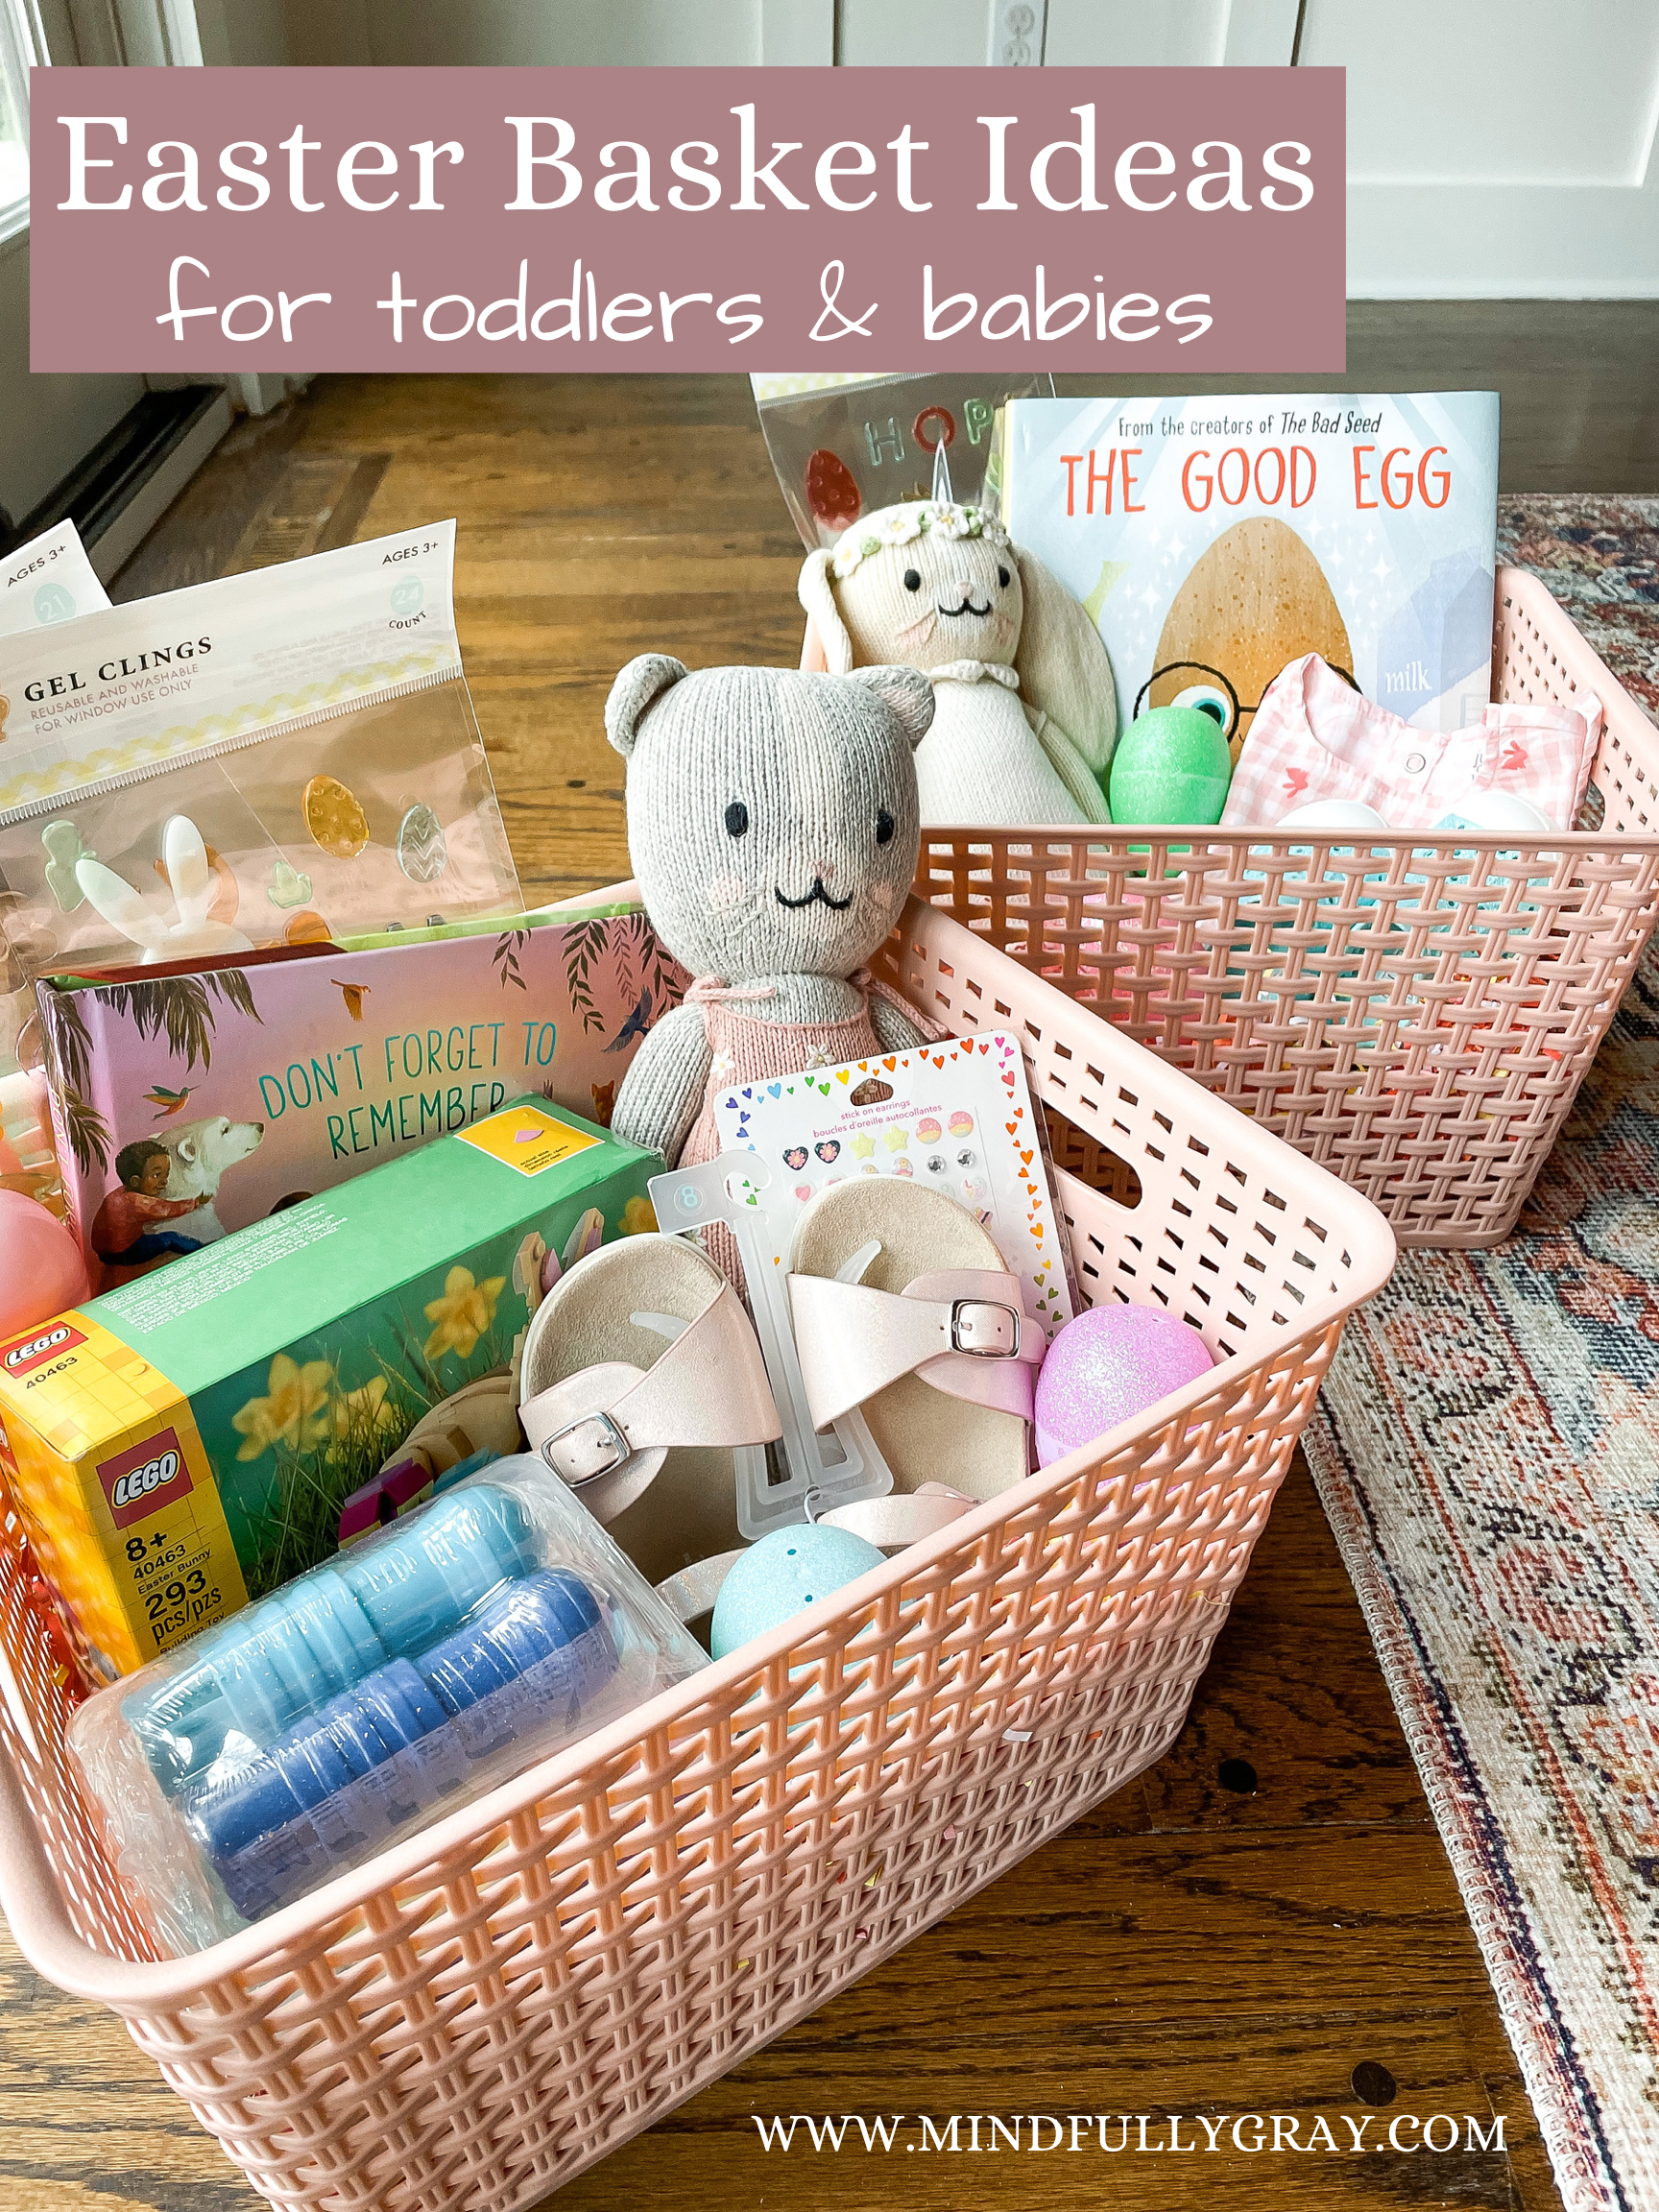 Easter Basket Ideas for Toddlers & Babies • Mindfully Gray